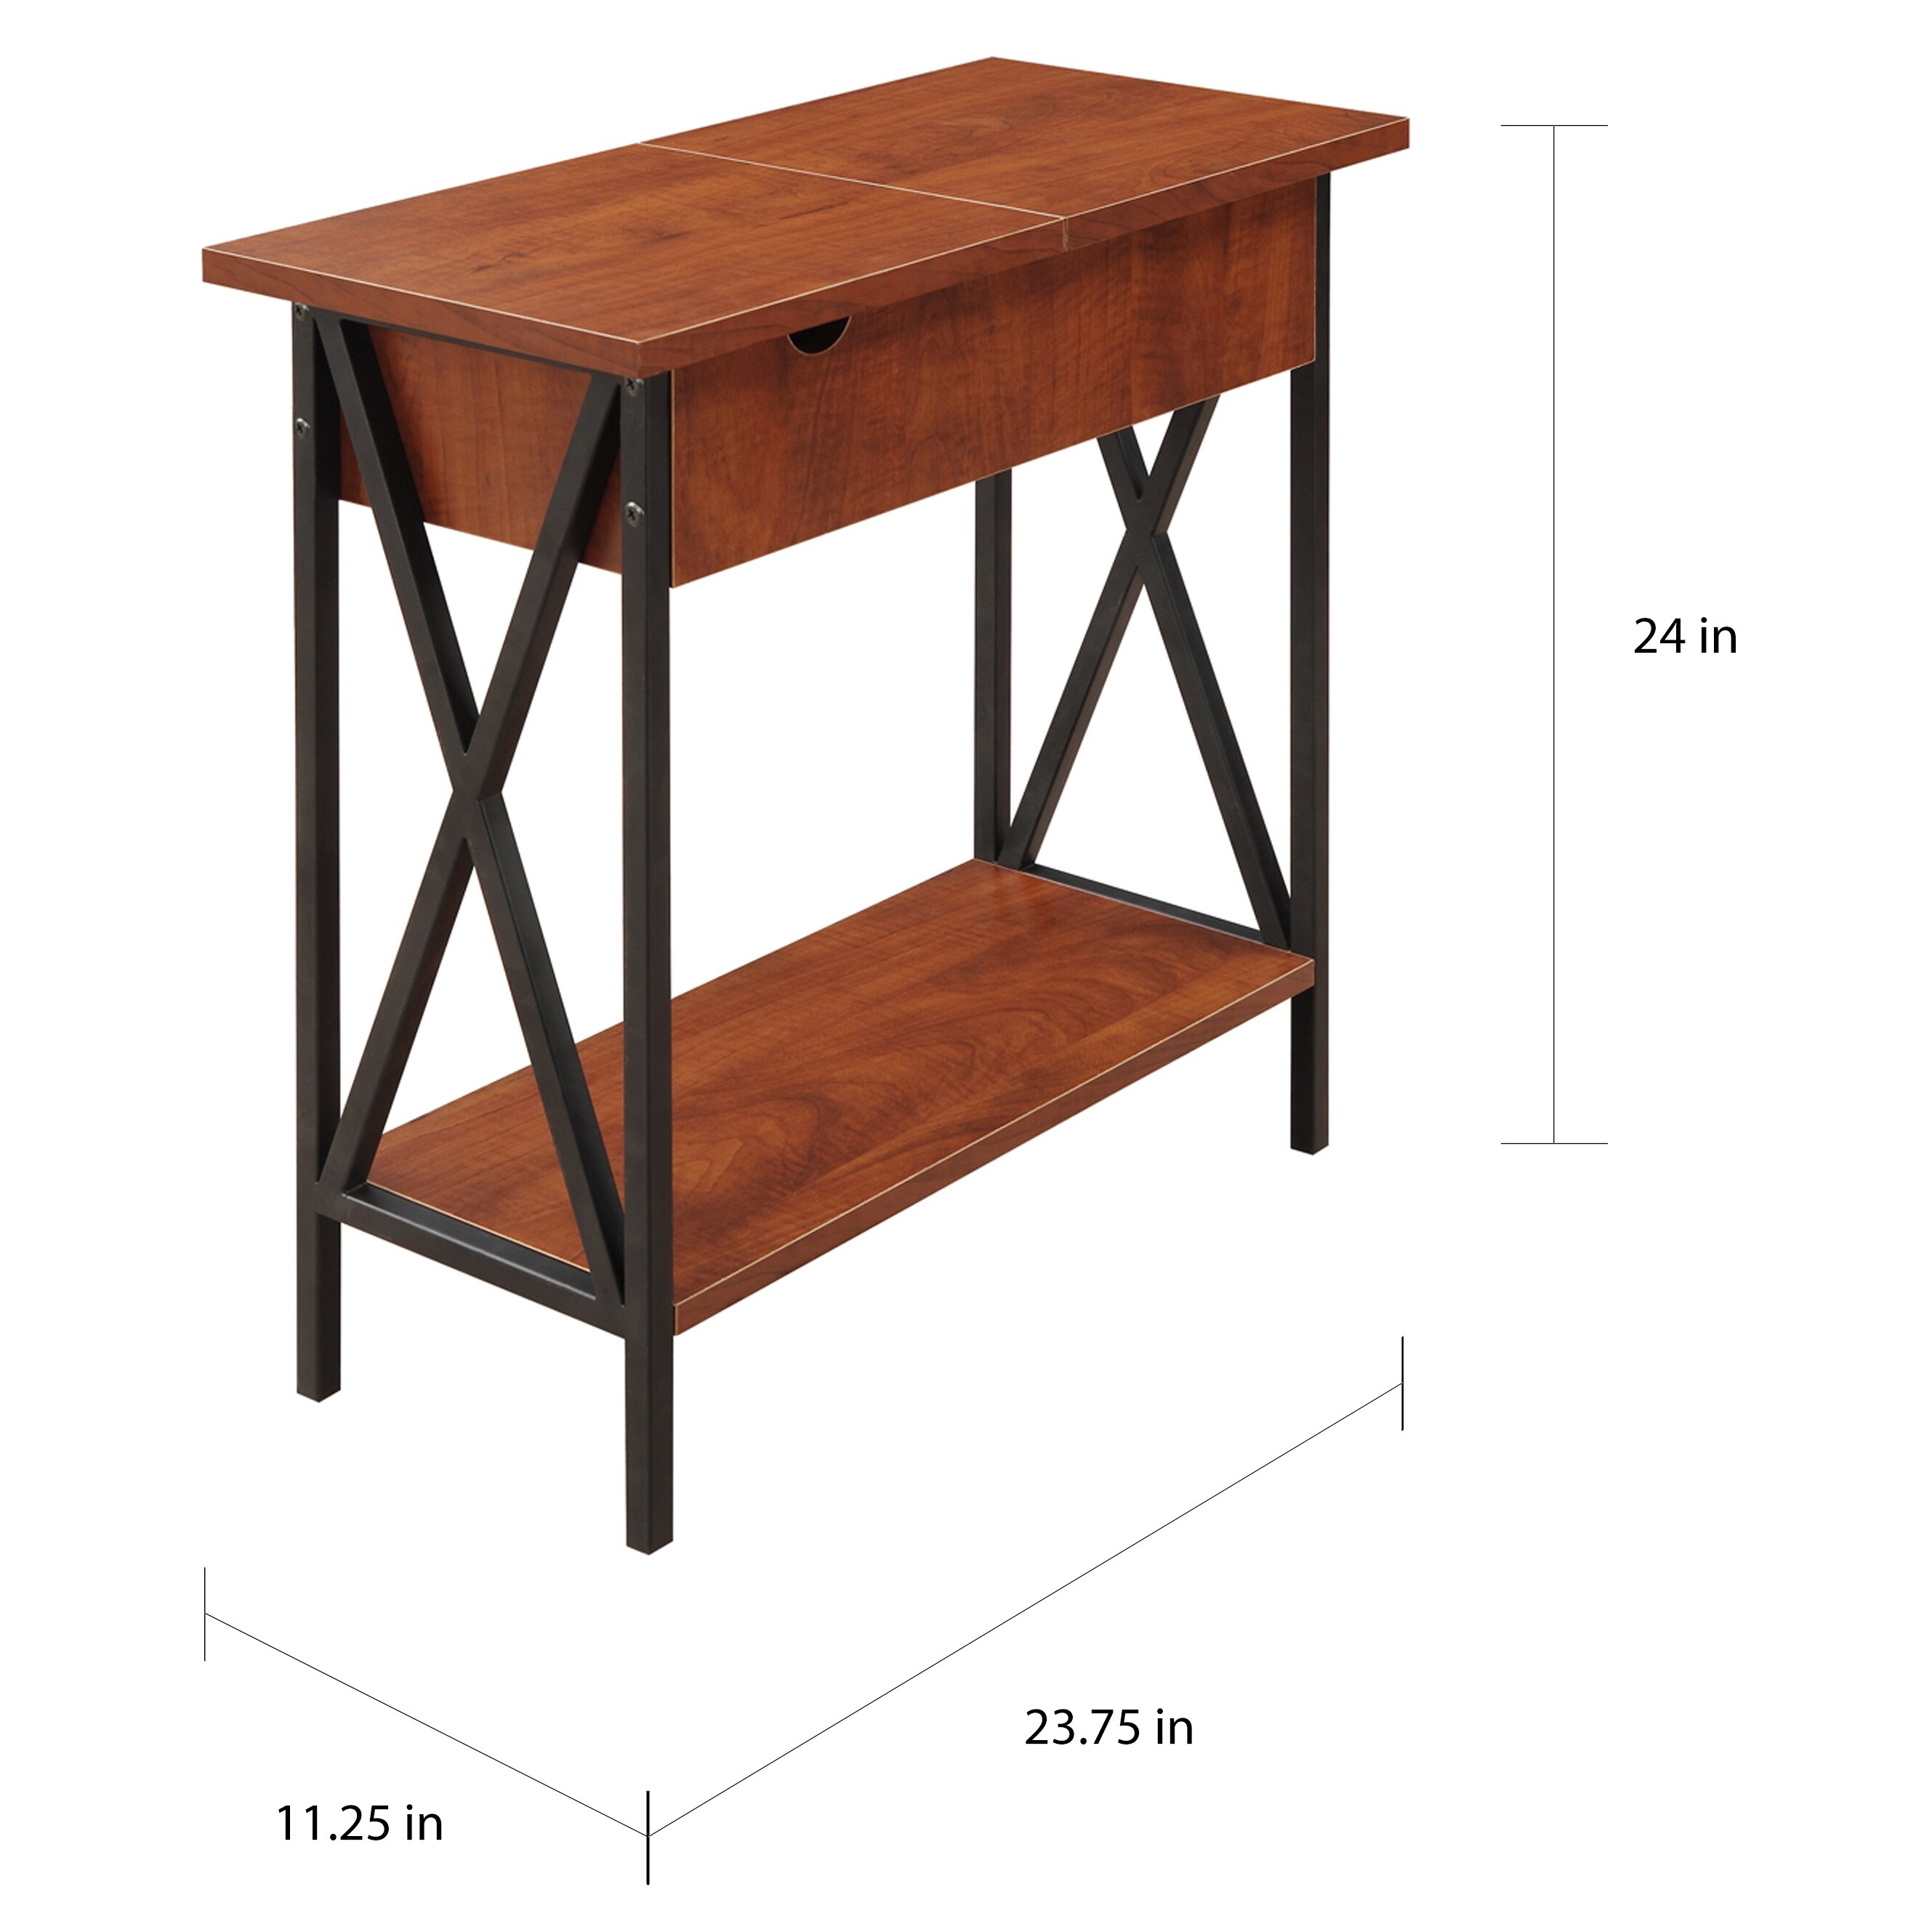 Details about   Convenience Concepts Tucson Flip Top End Table with Charging Station 